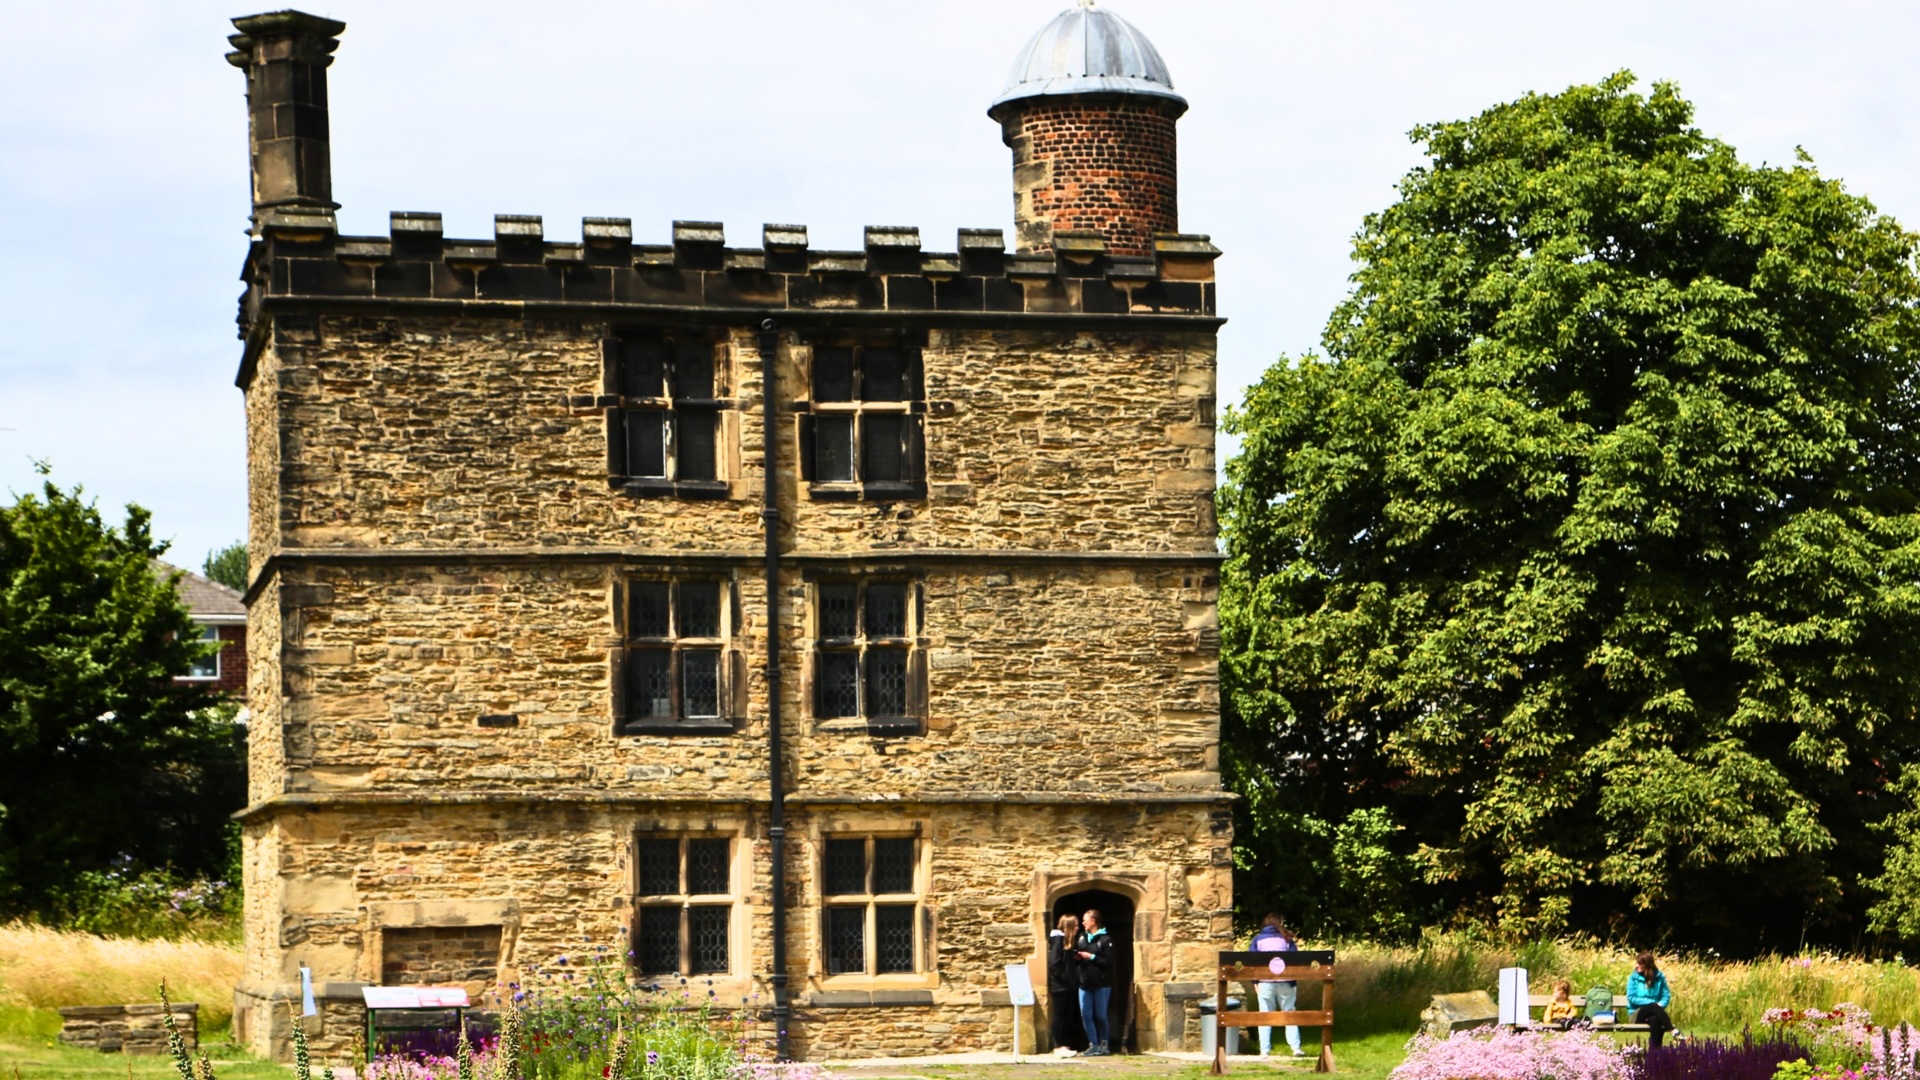 The newly interpreted sixteenth century Tudor Turret House is a historical visitor attraction at Sheffield Manor Lodge.